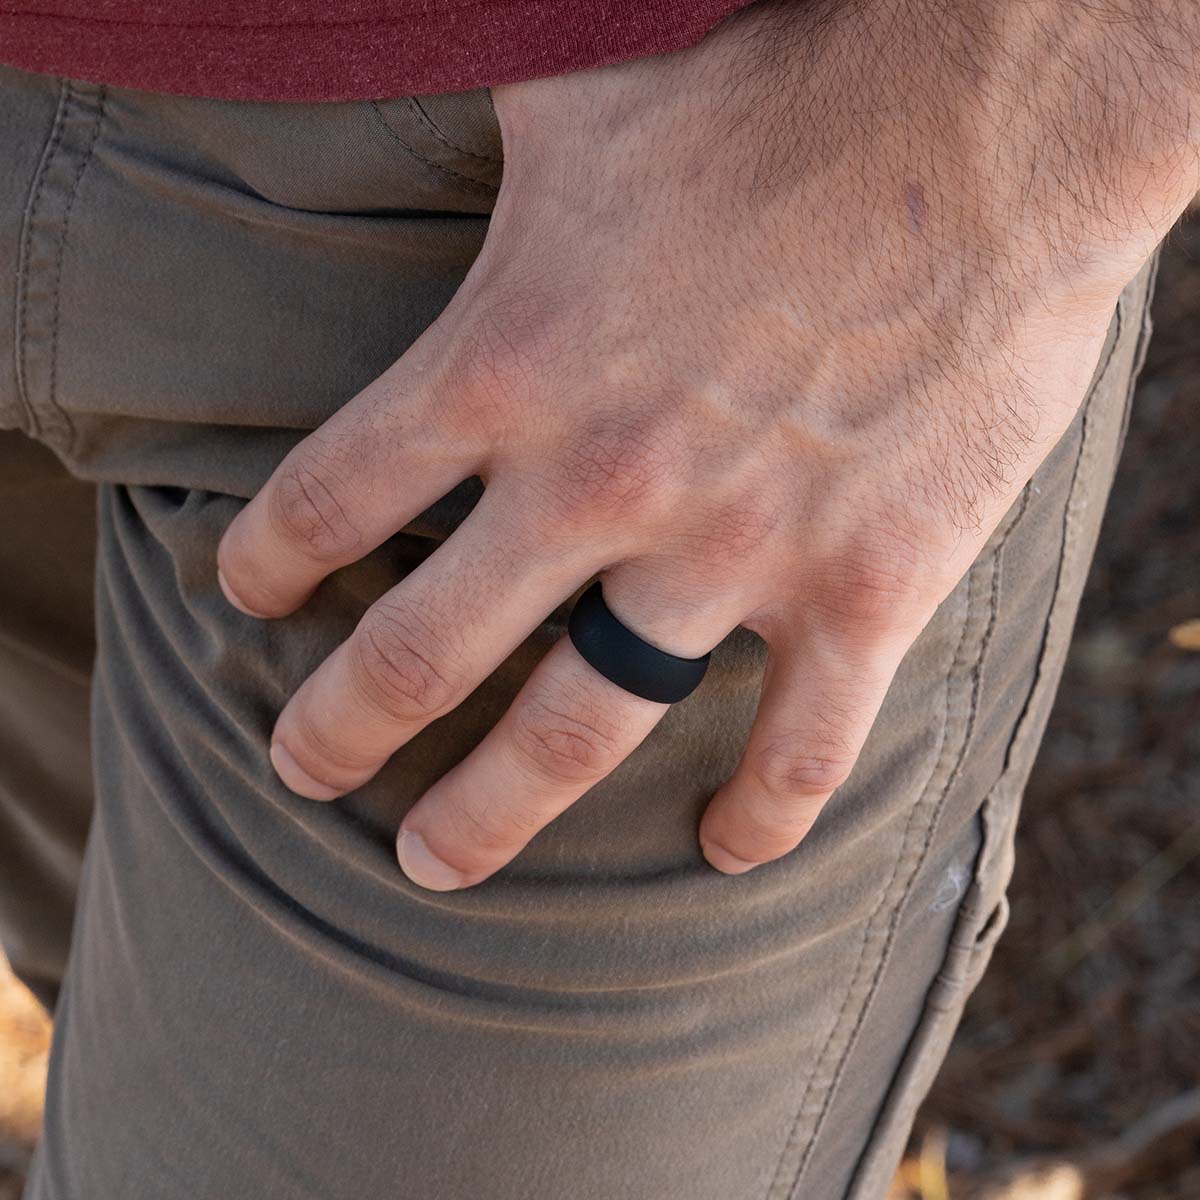 Comfortable black silicone wedding ring on a male hand